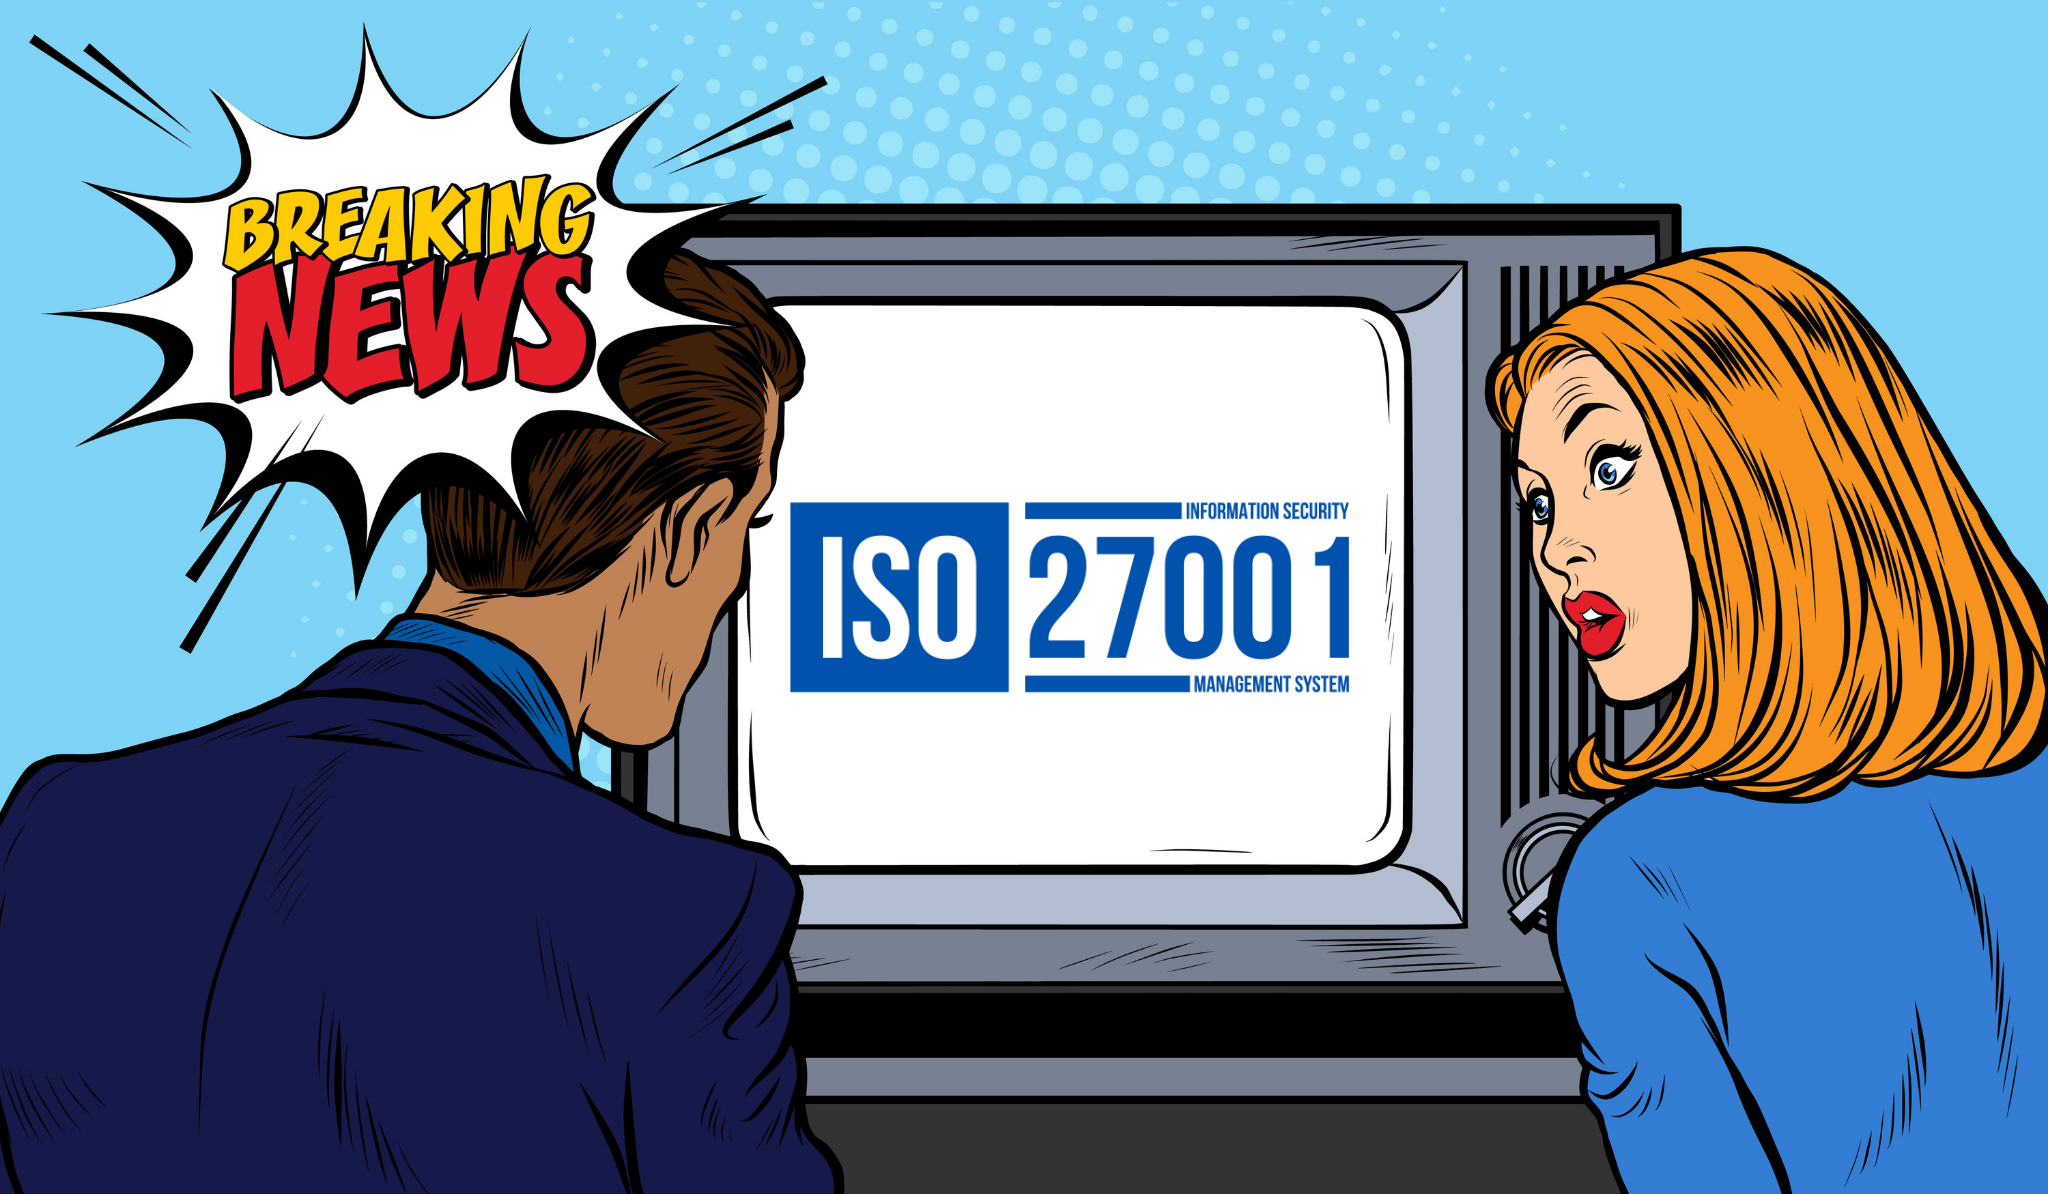 Propel is now ISO 27001 Certified – so what does that mean for you?